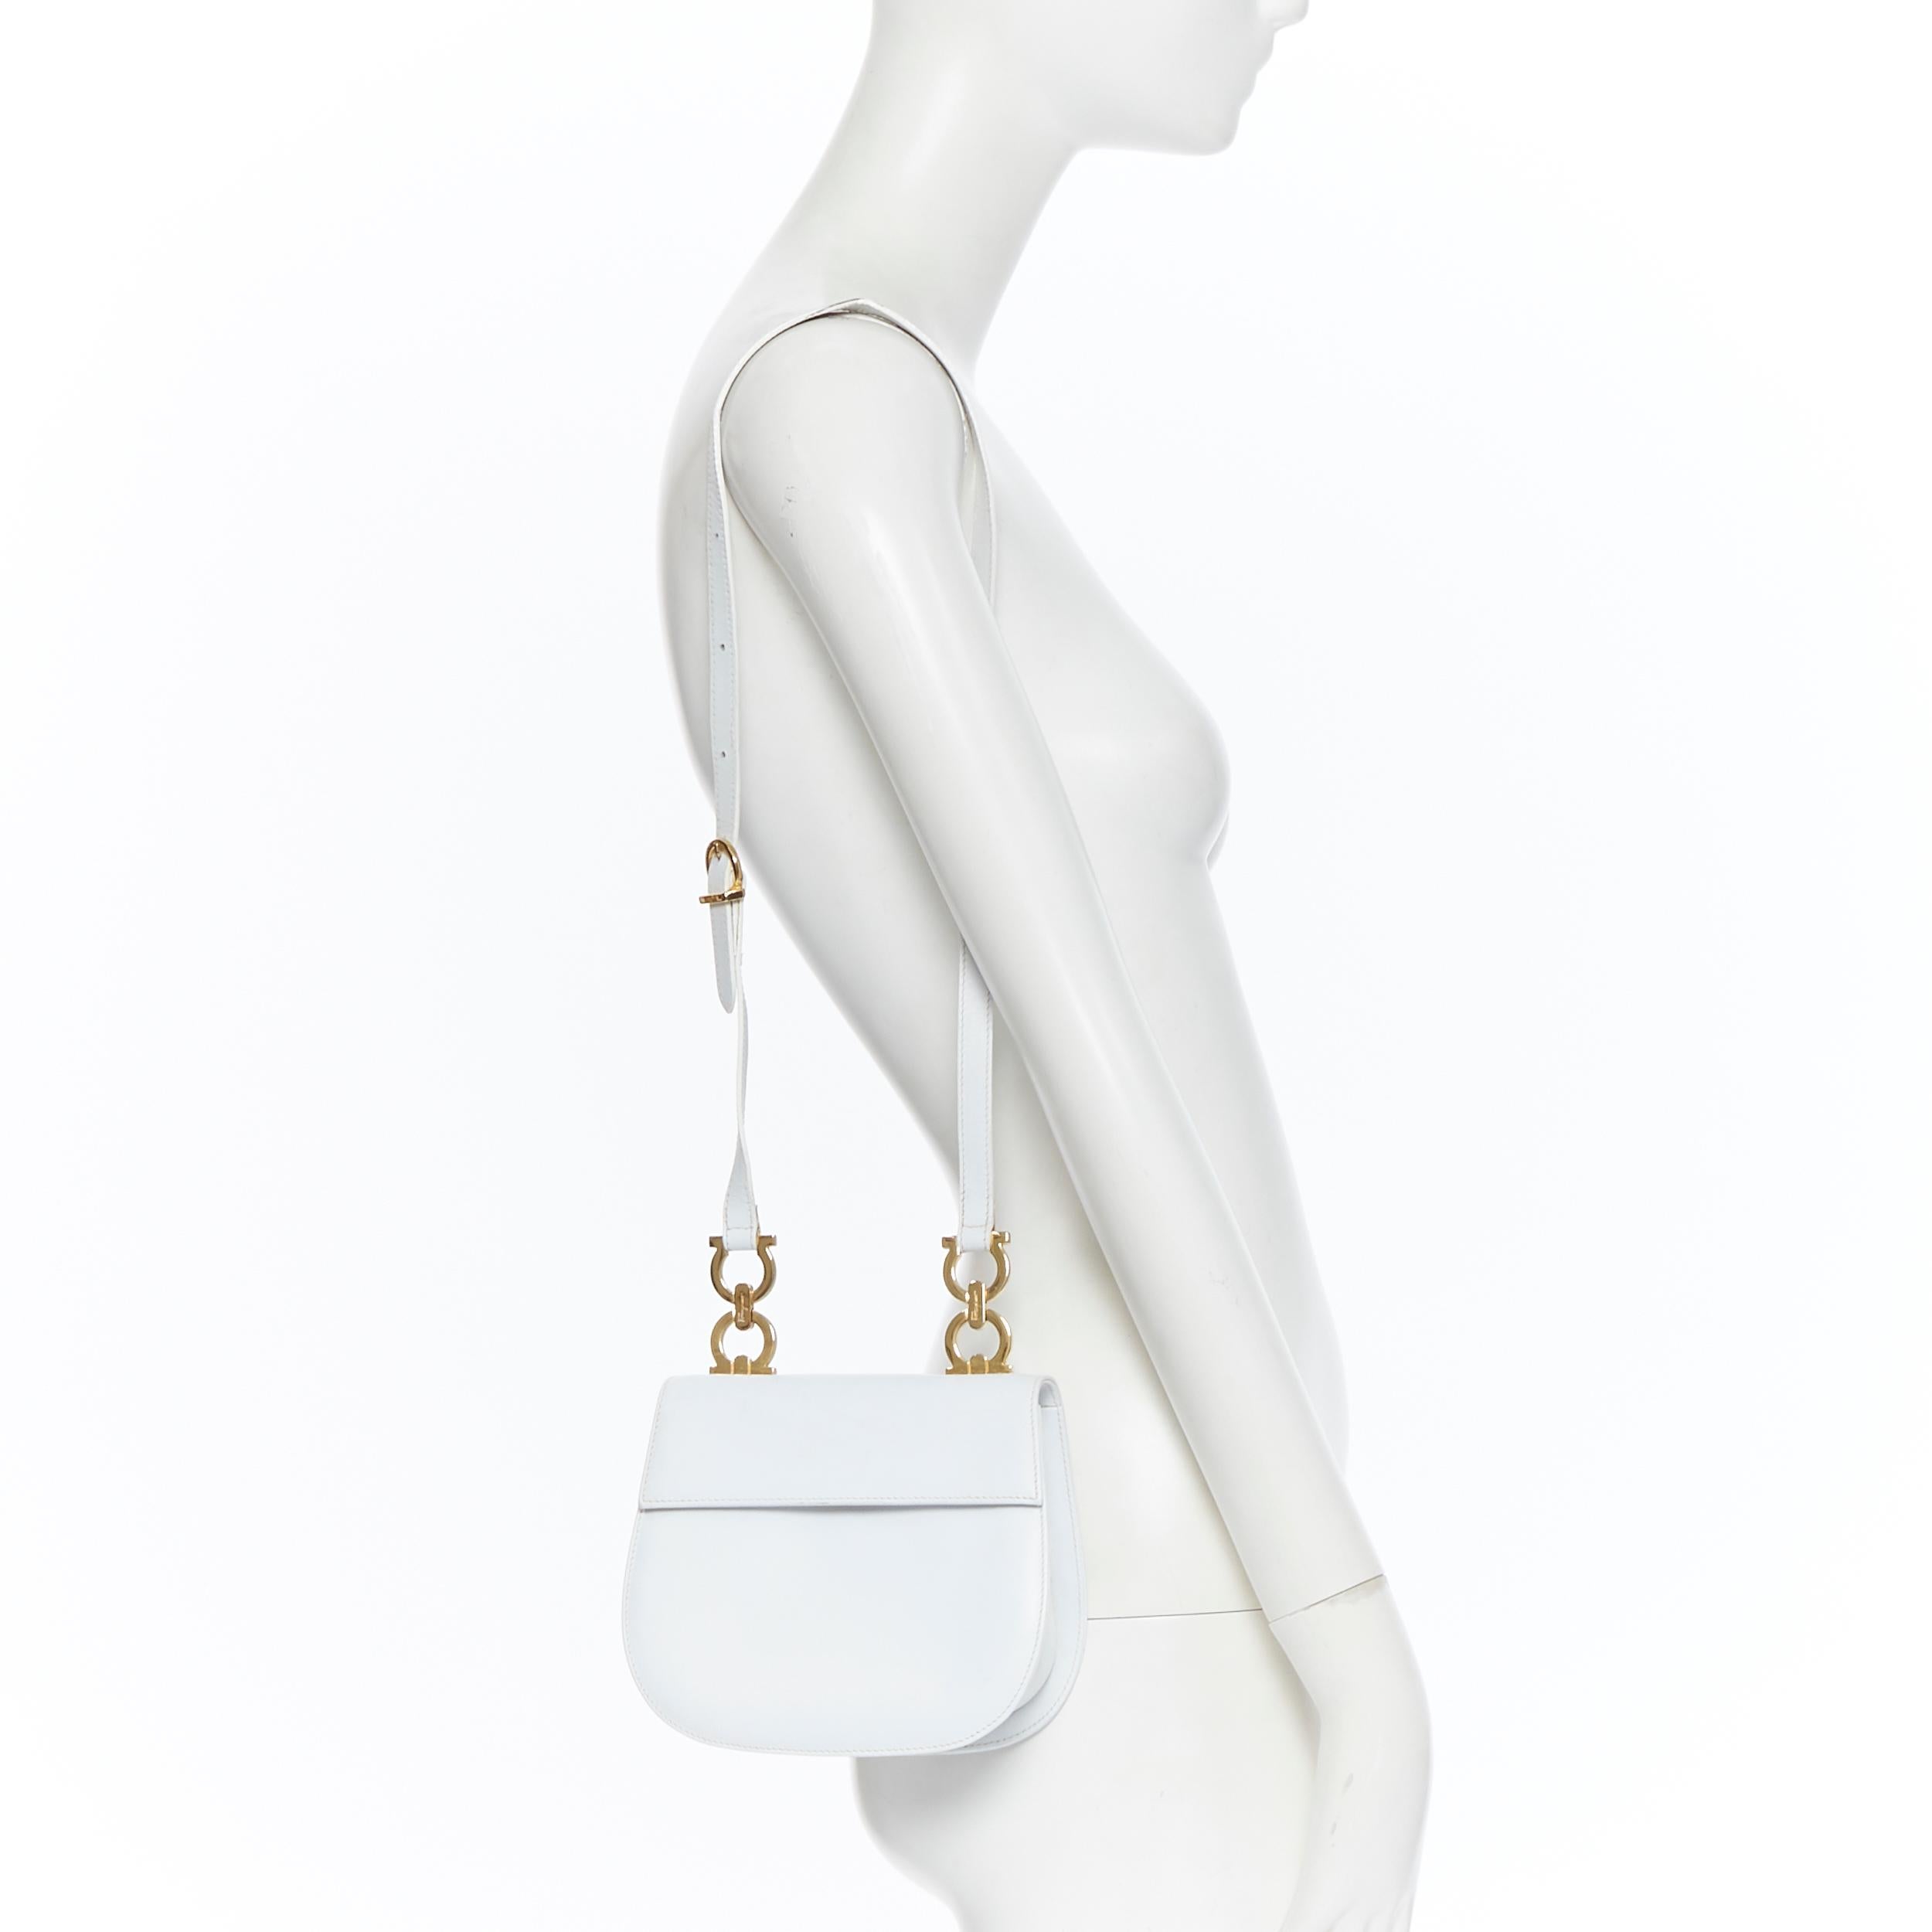 SALVATORE FERRAGAMO white leather gold hardware flap front shoulder satchel bag
Brand: Salvatore Ferragamo
Model Name / Style: Shoulder bag
Material: Leather
Color: White
Pattern: Solid
Extra Detail: Shoulder Strap.
Made in: Italy

CONDITION: